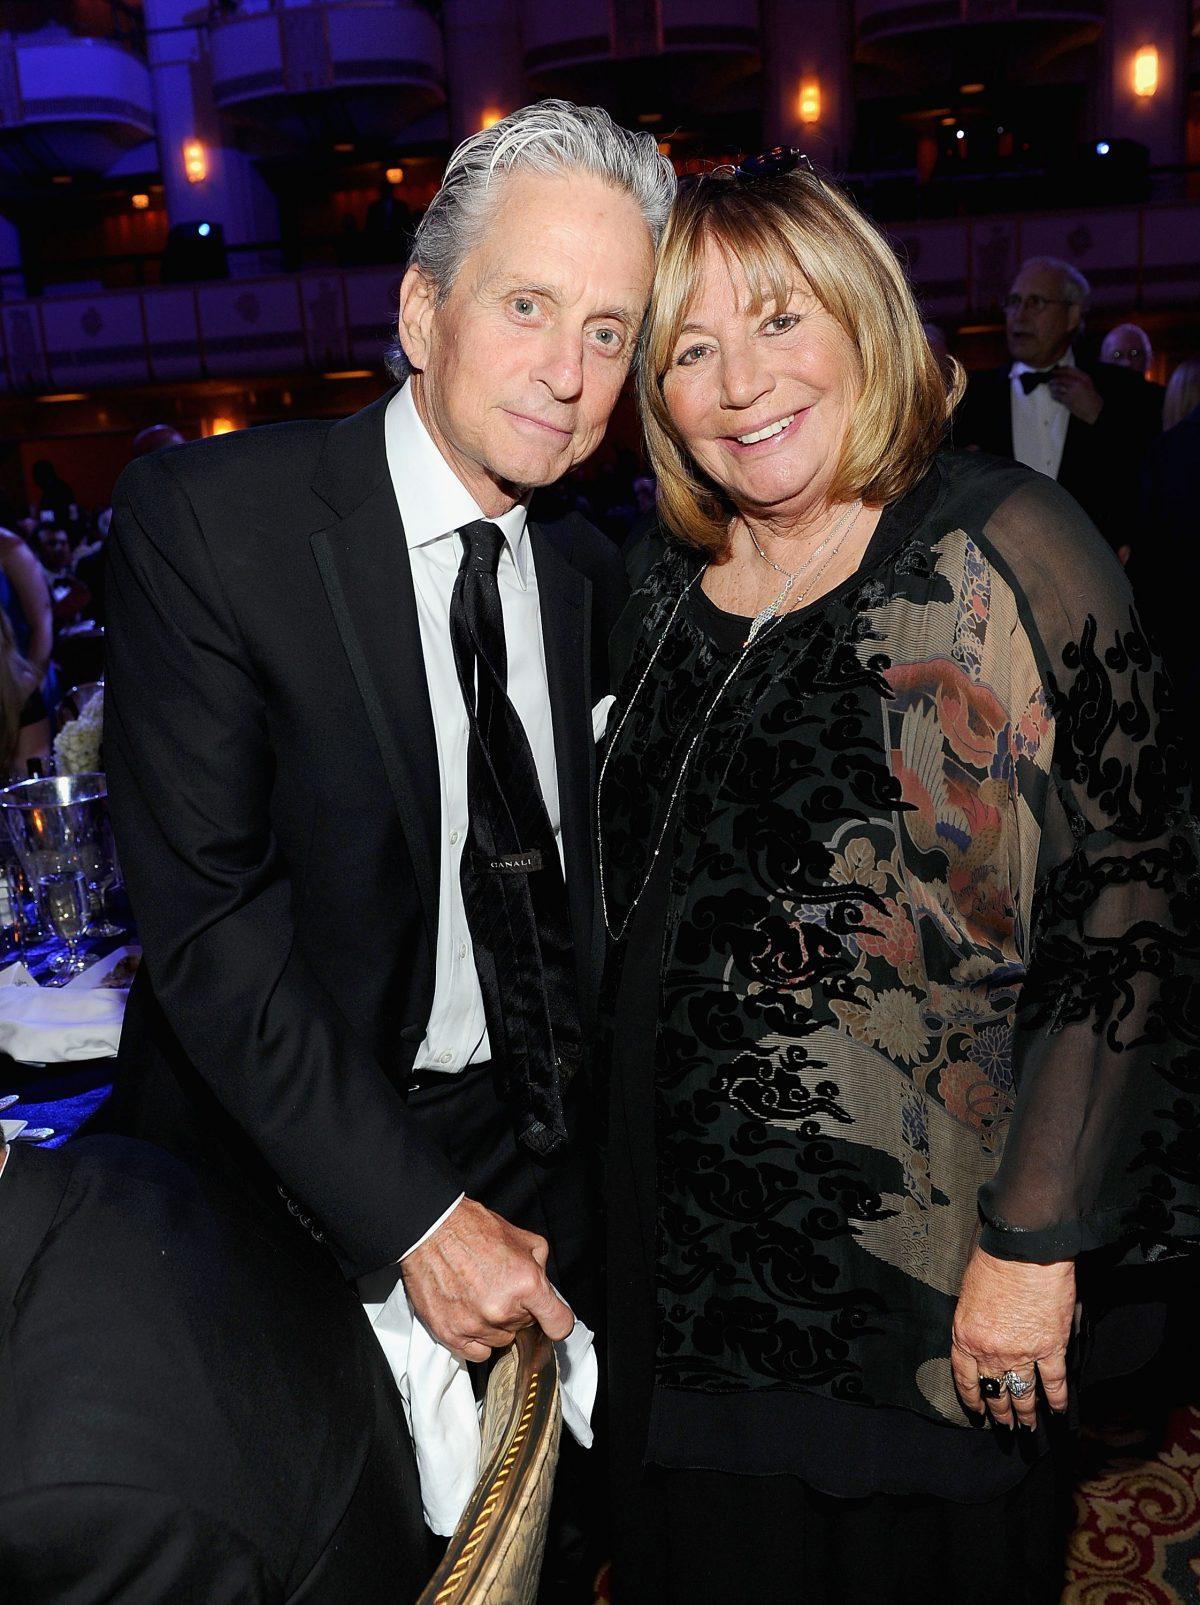 Actor Michael Douglas and director Penny Marshall attend the 33rd Annual Police Foundation gala at The Waldorf Astoria in New York City, on June 2, 2011. (Jamie McCarthy/Getty Images)